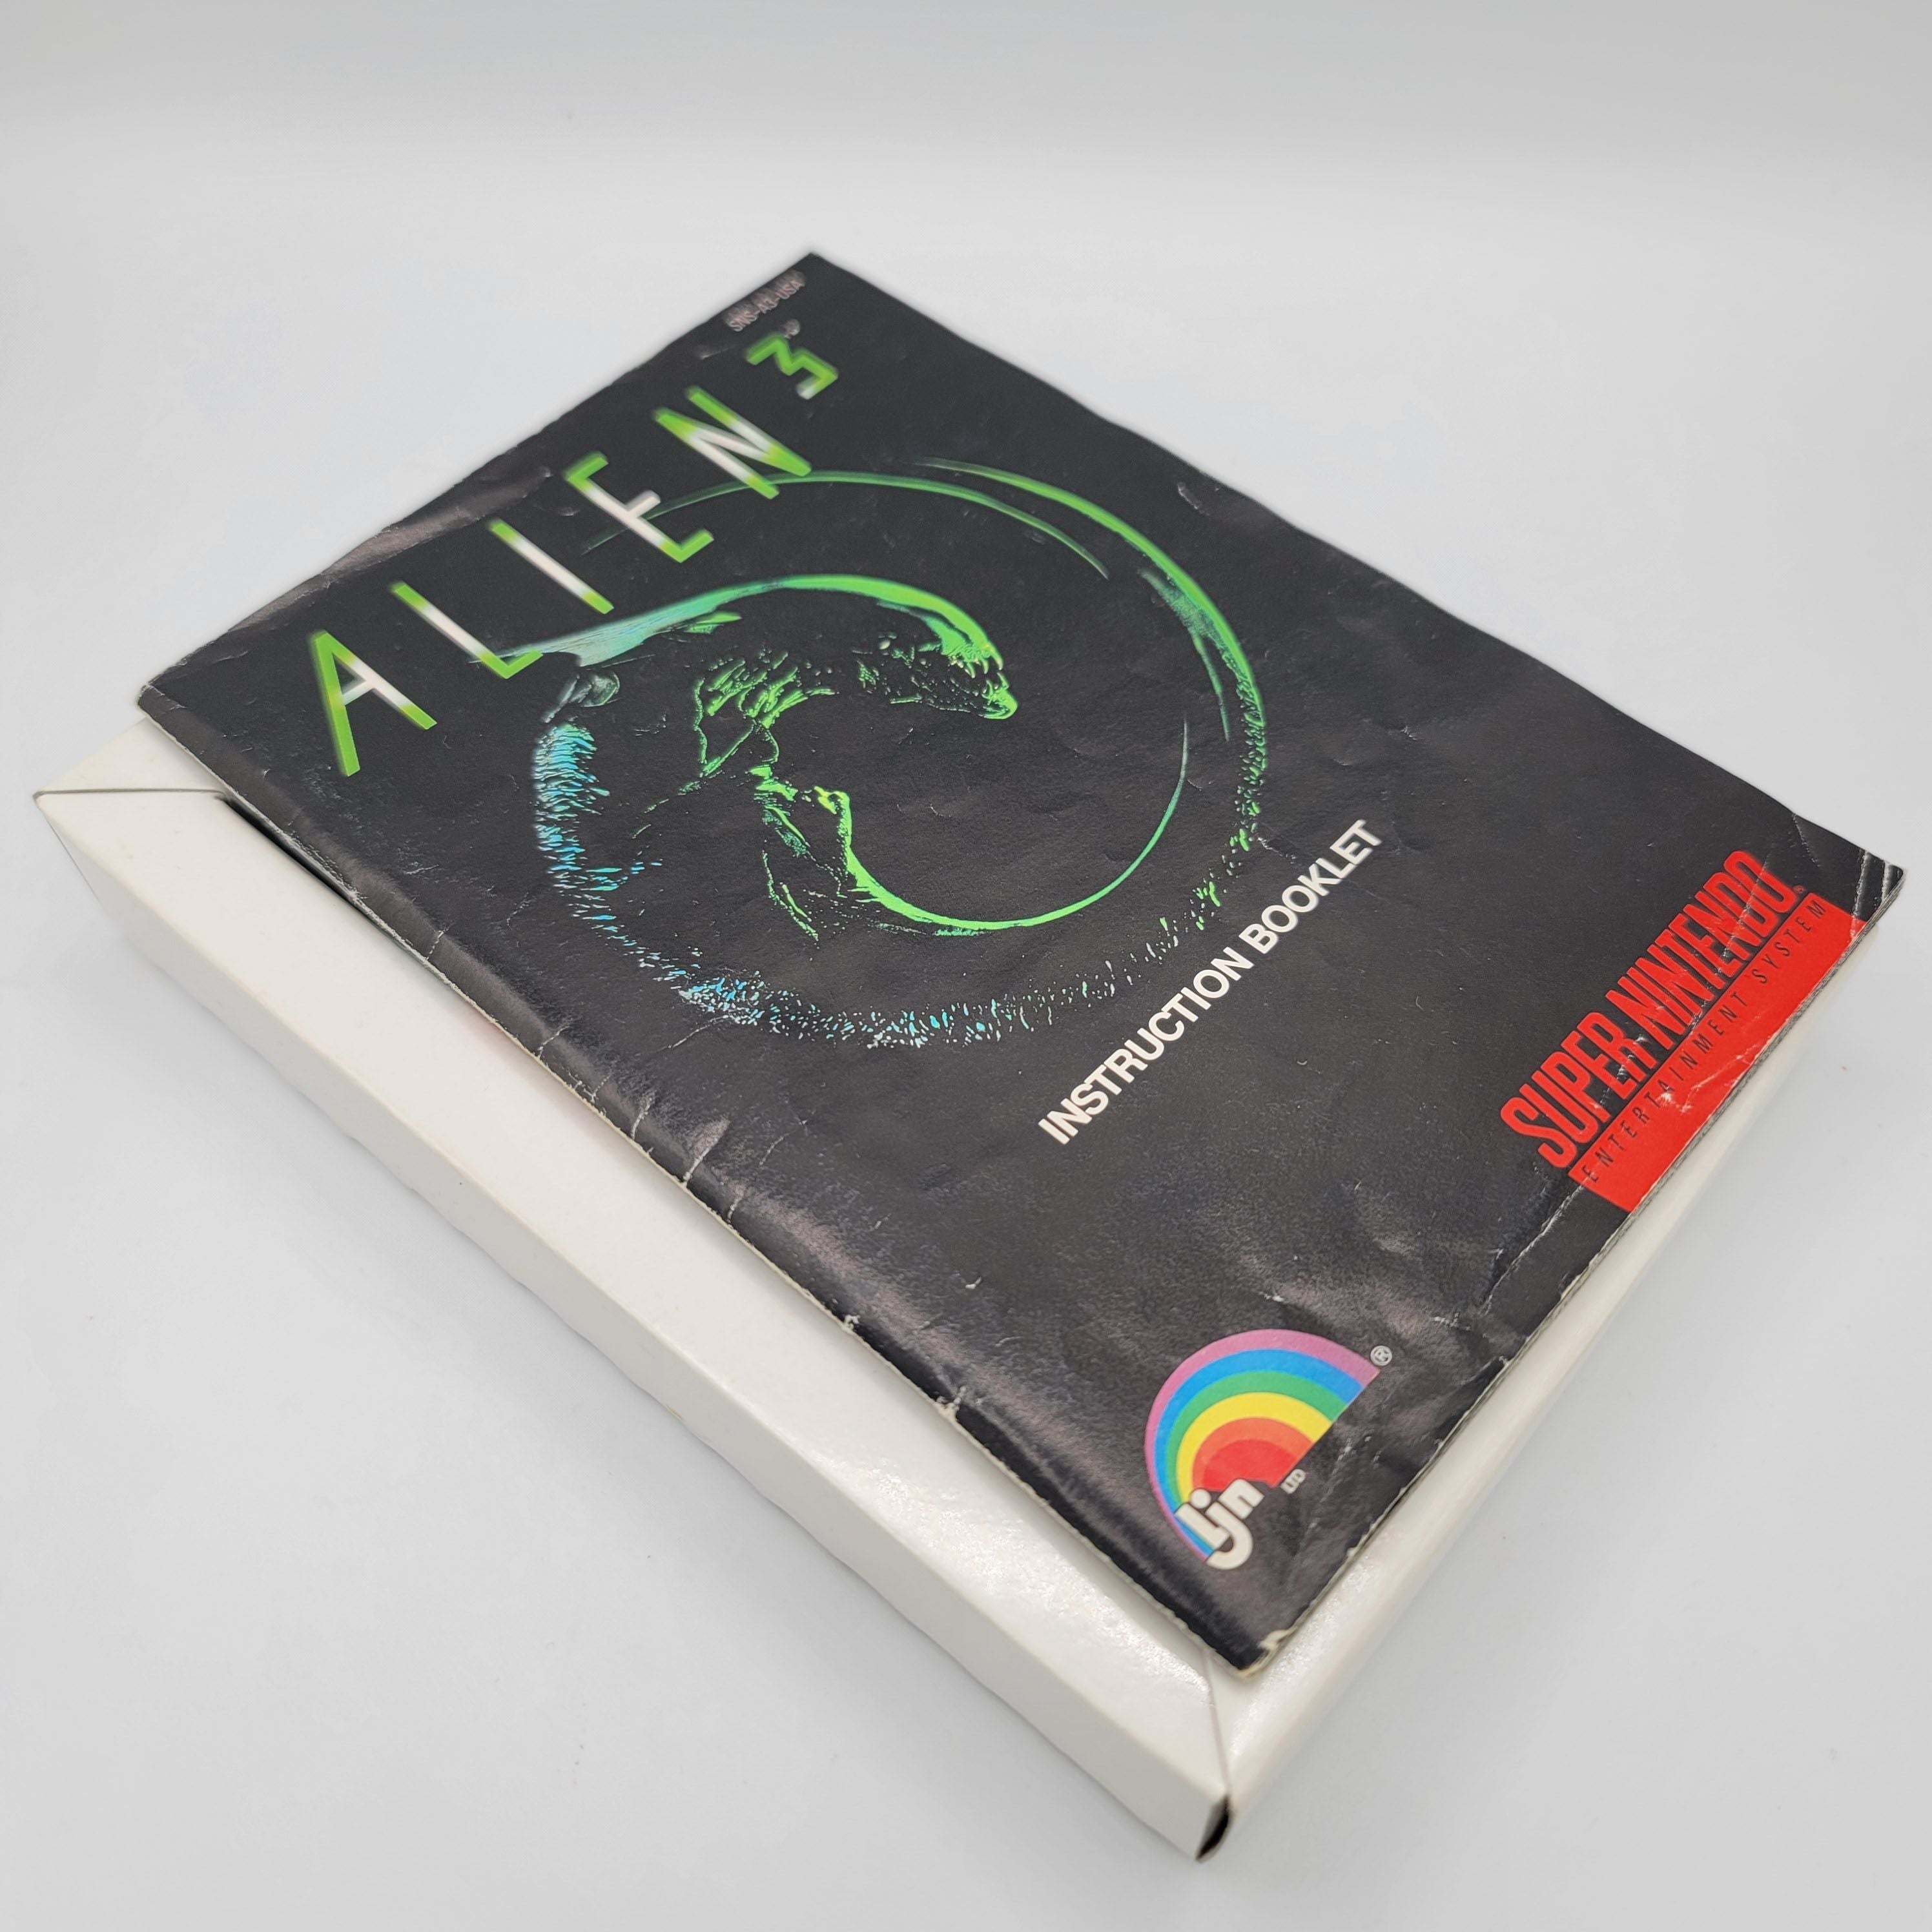 SNES - Alien 3 (Complete in Box / B+ / With Manual)